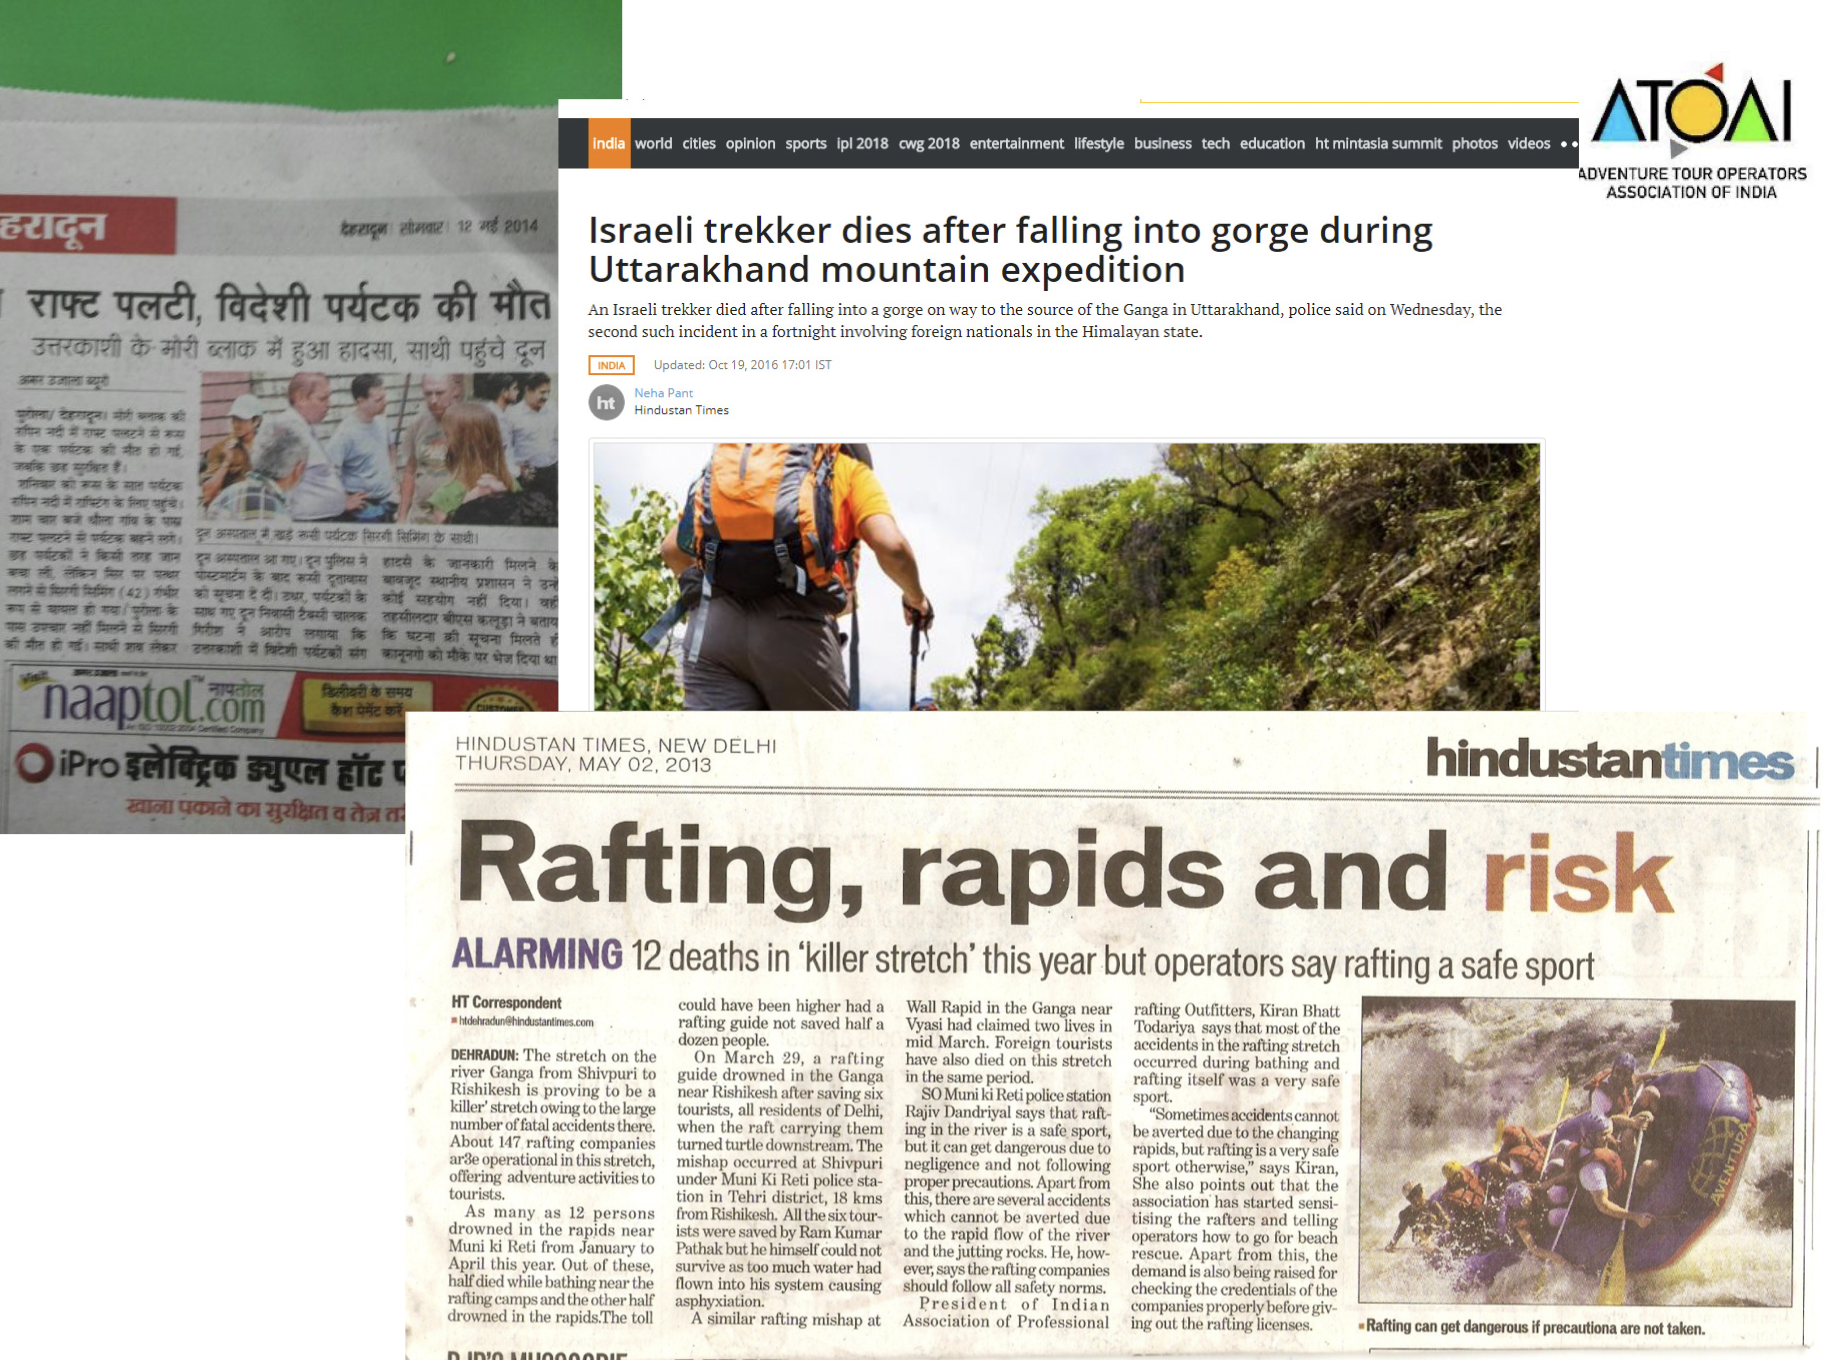 newspaper clippings showing deaths and injuries in the Indian mountains